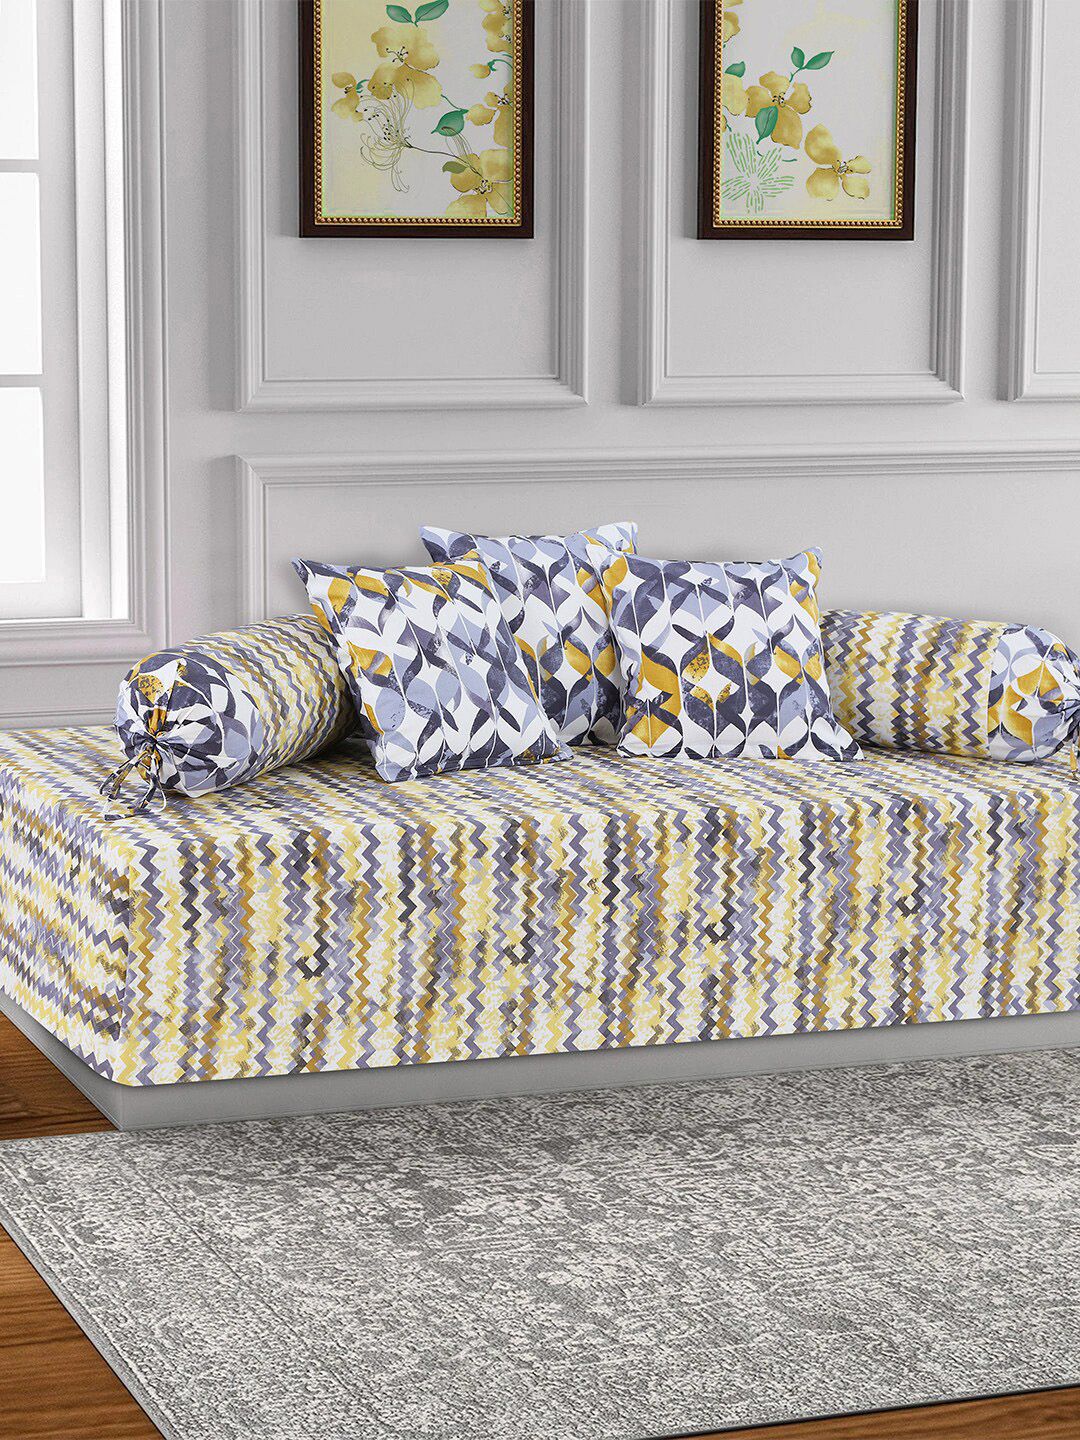 Salona Bichona Set Of 6 Yellow & Grey Printed Bedsheet With Bolster & Cushion Covers Price in India